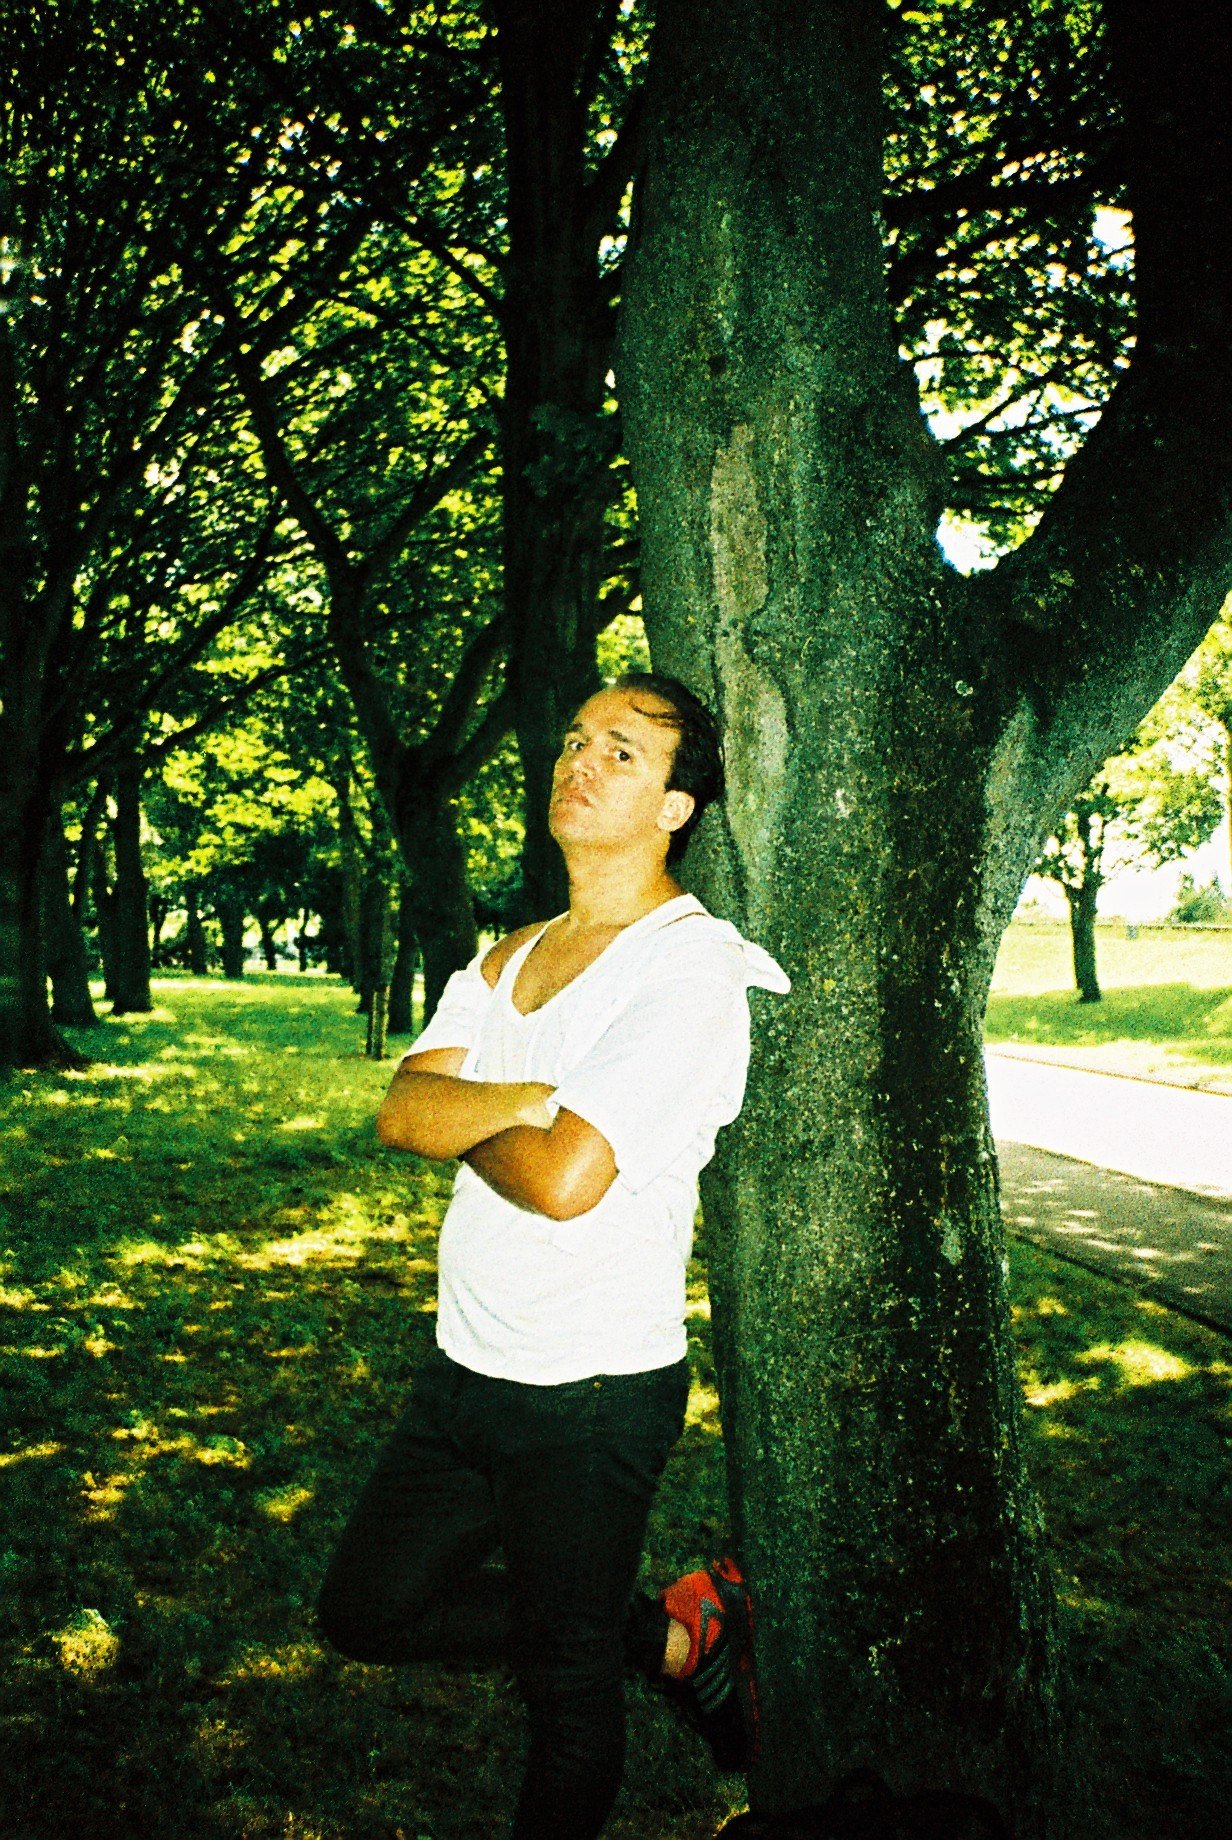 Shawn Watson on location in an avenue of trees in South Queensferry.